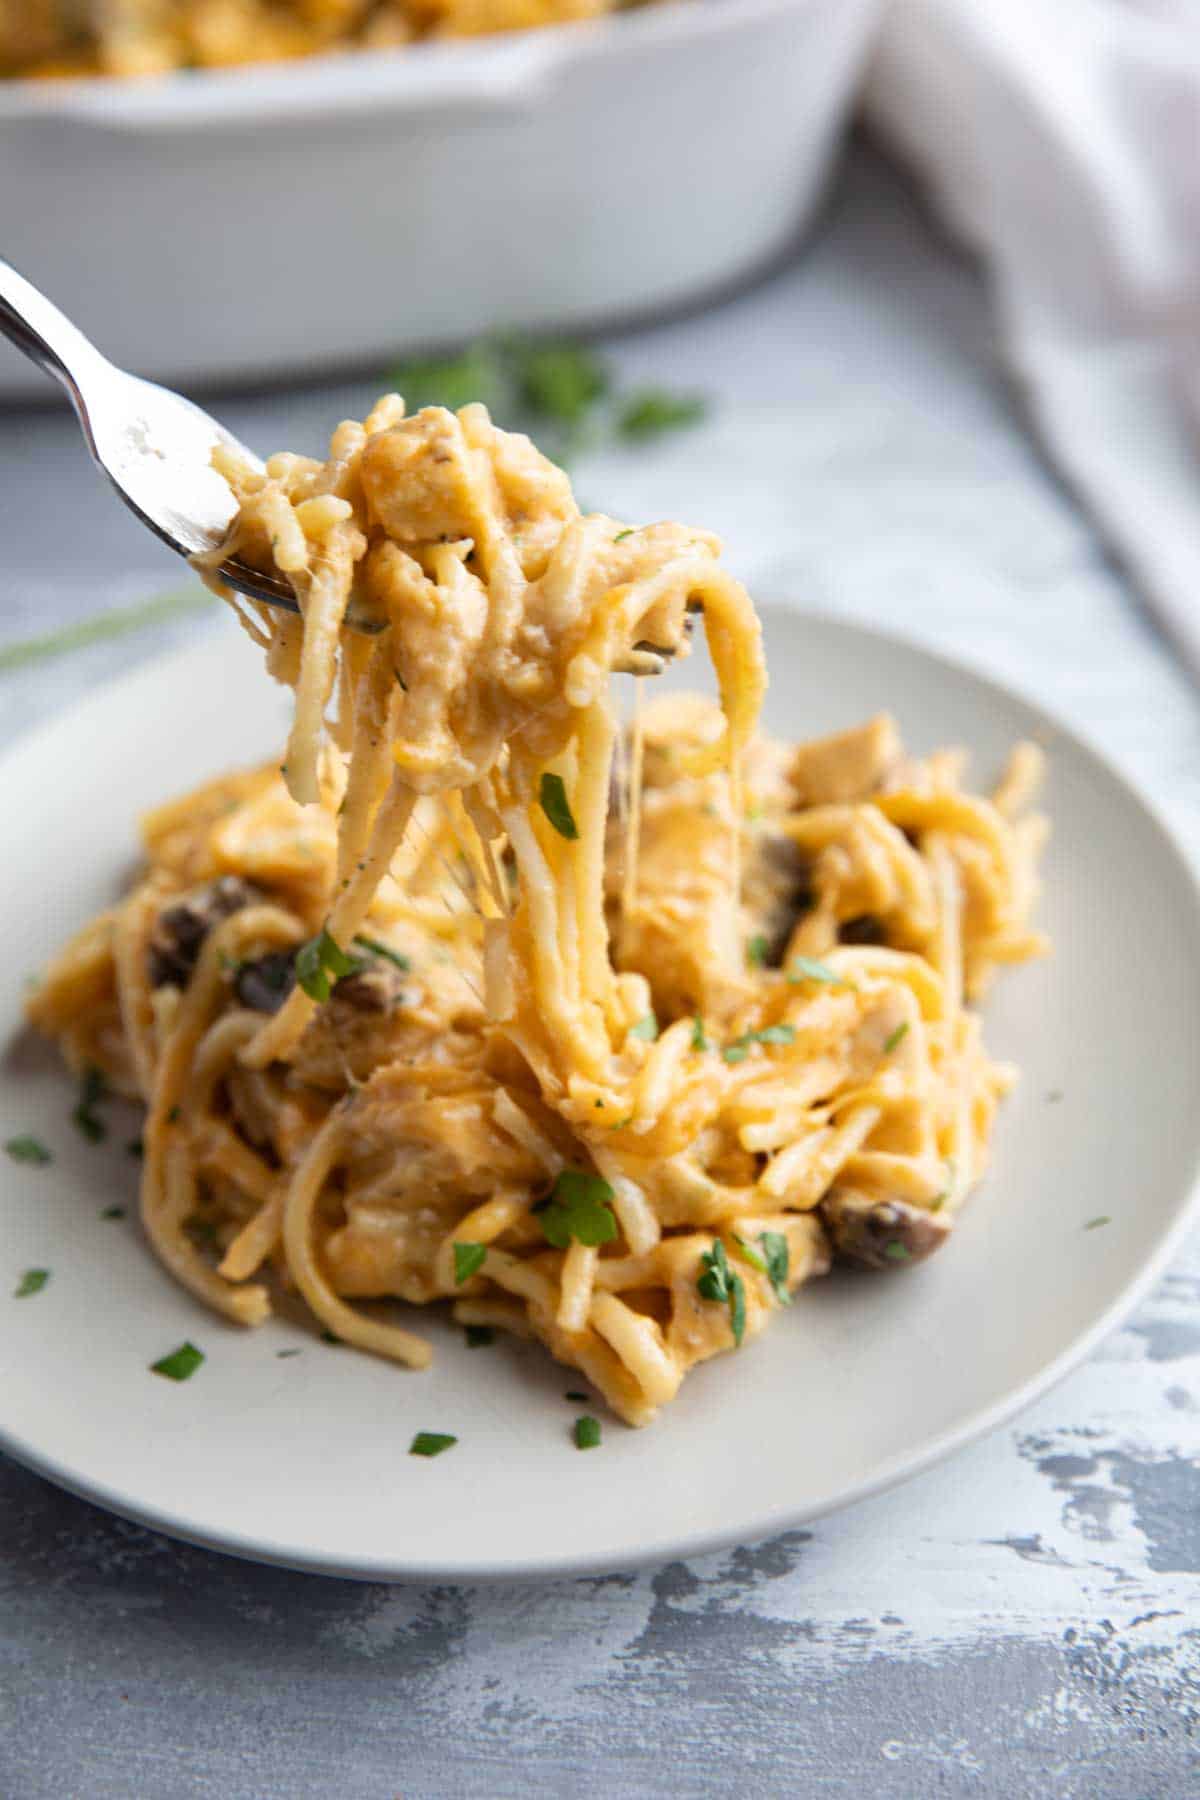 Chicken tetrazzini on a plate with a fork taking a bite.